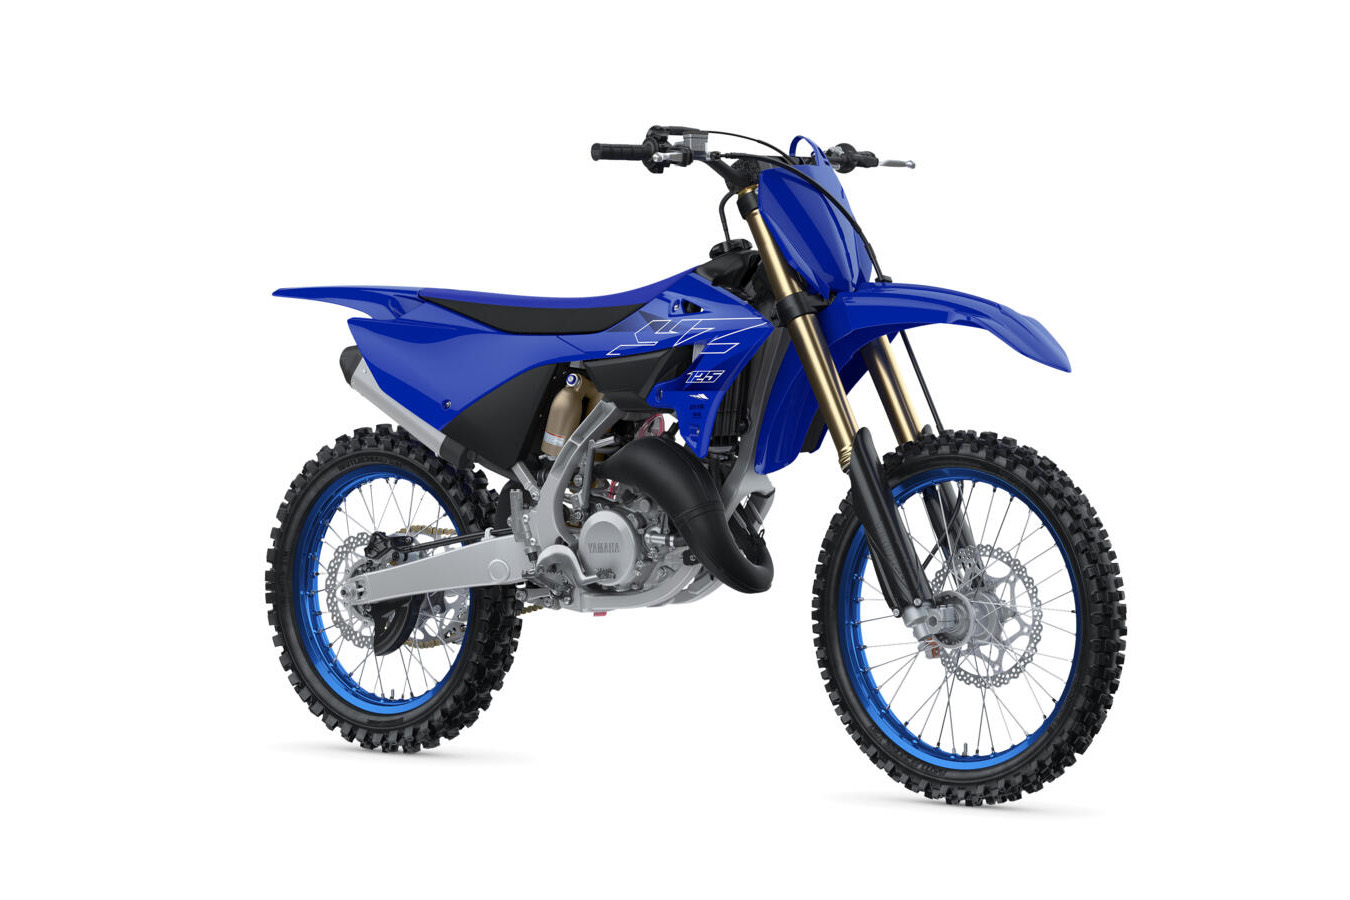 First look: Yamaha’s new 2022 YZ range goes big on the two-stroke 125